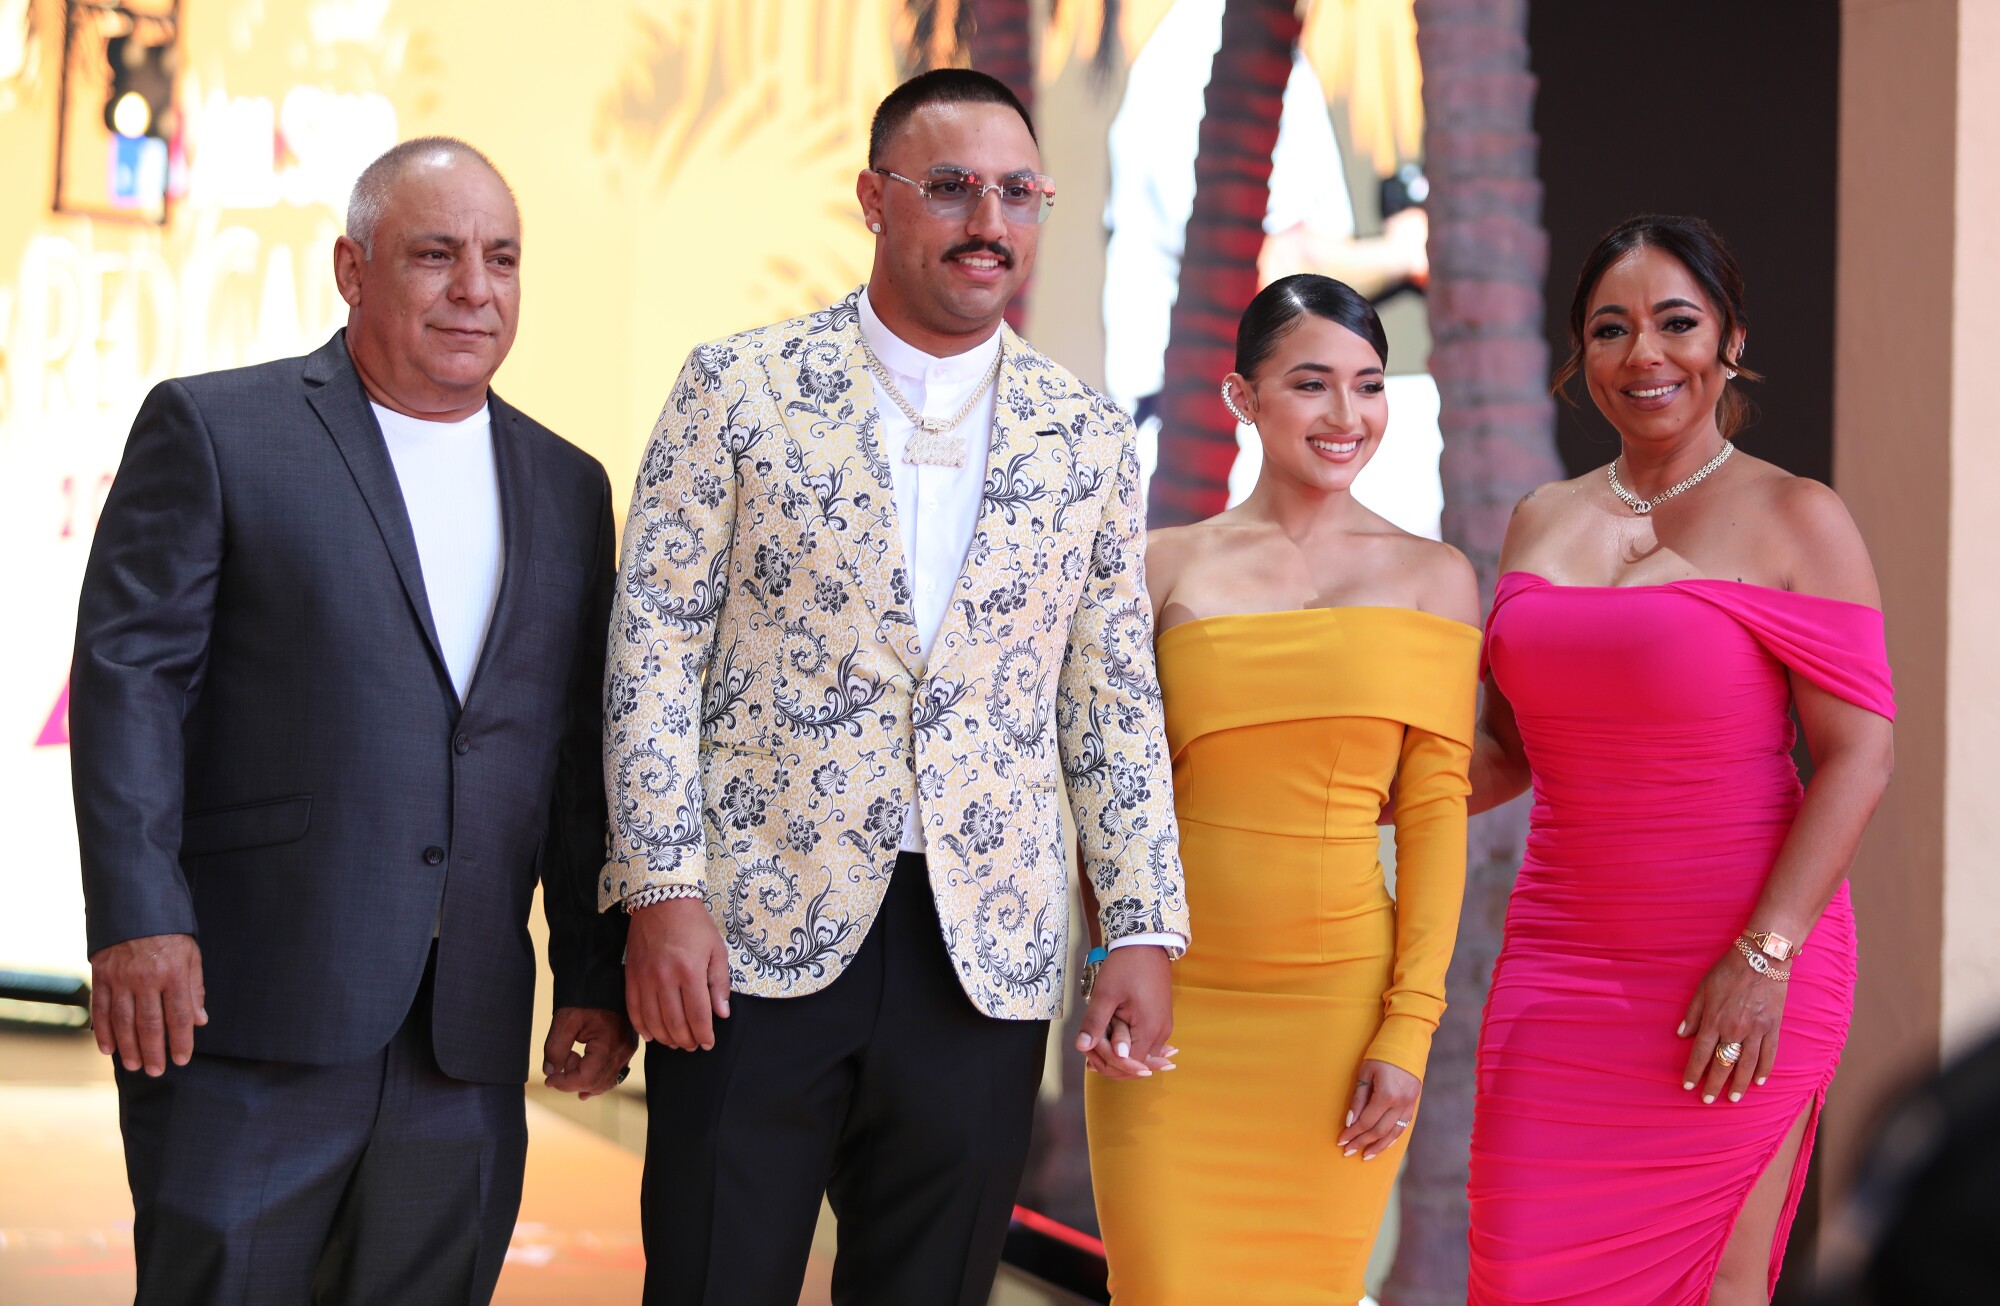 New York Yankees pitcher Nestor Cortés Jr. arrives with his and family at the 2022 MLB All-Star Game Red Carpet Show.